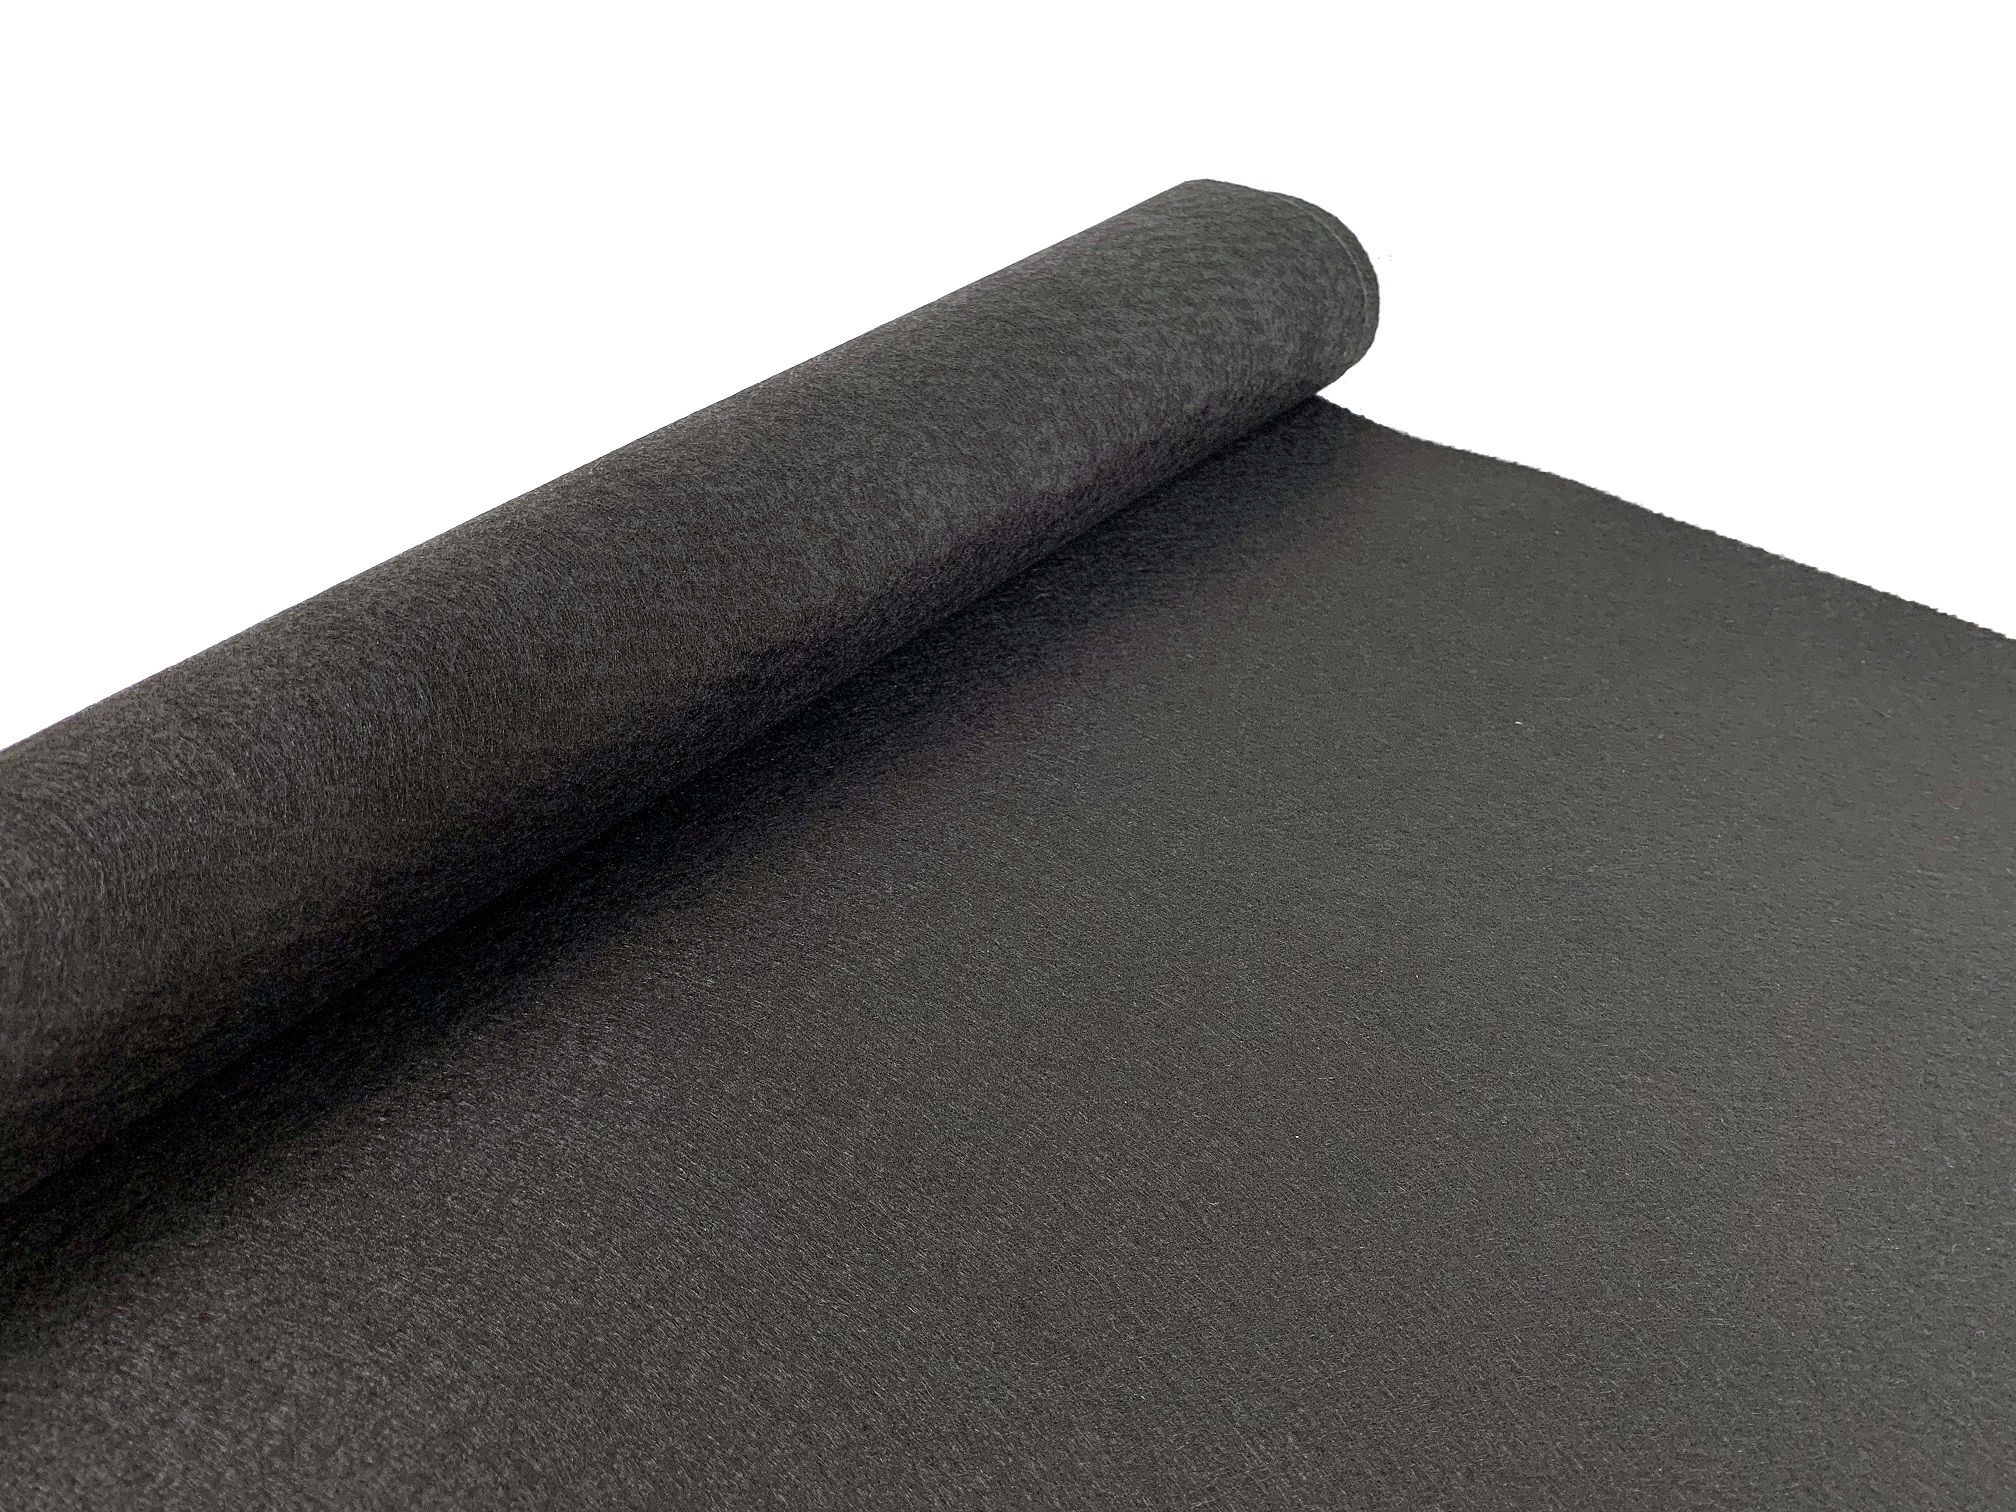 PLA needle-punched non-woven fabric: an environmentally friendly material